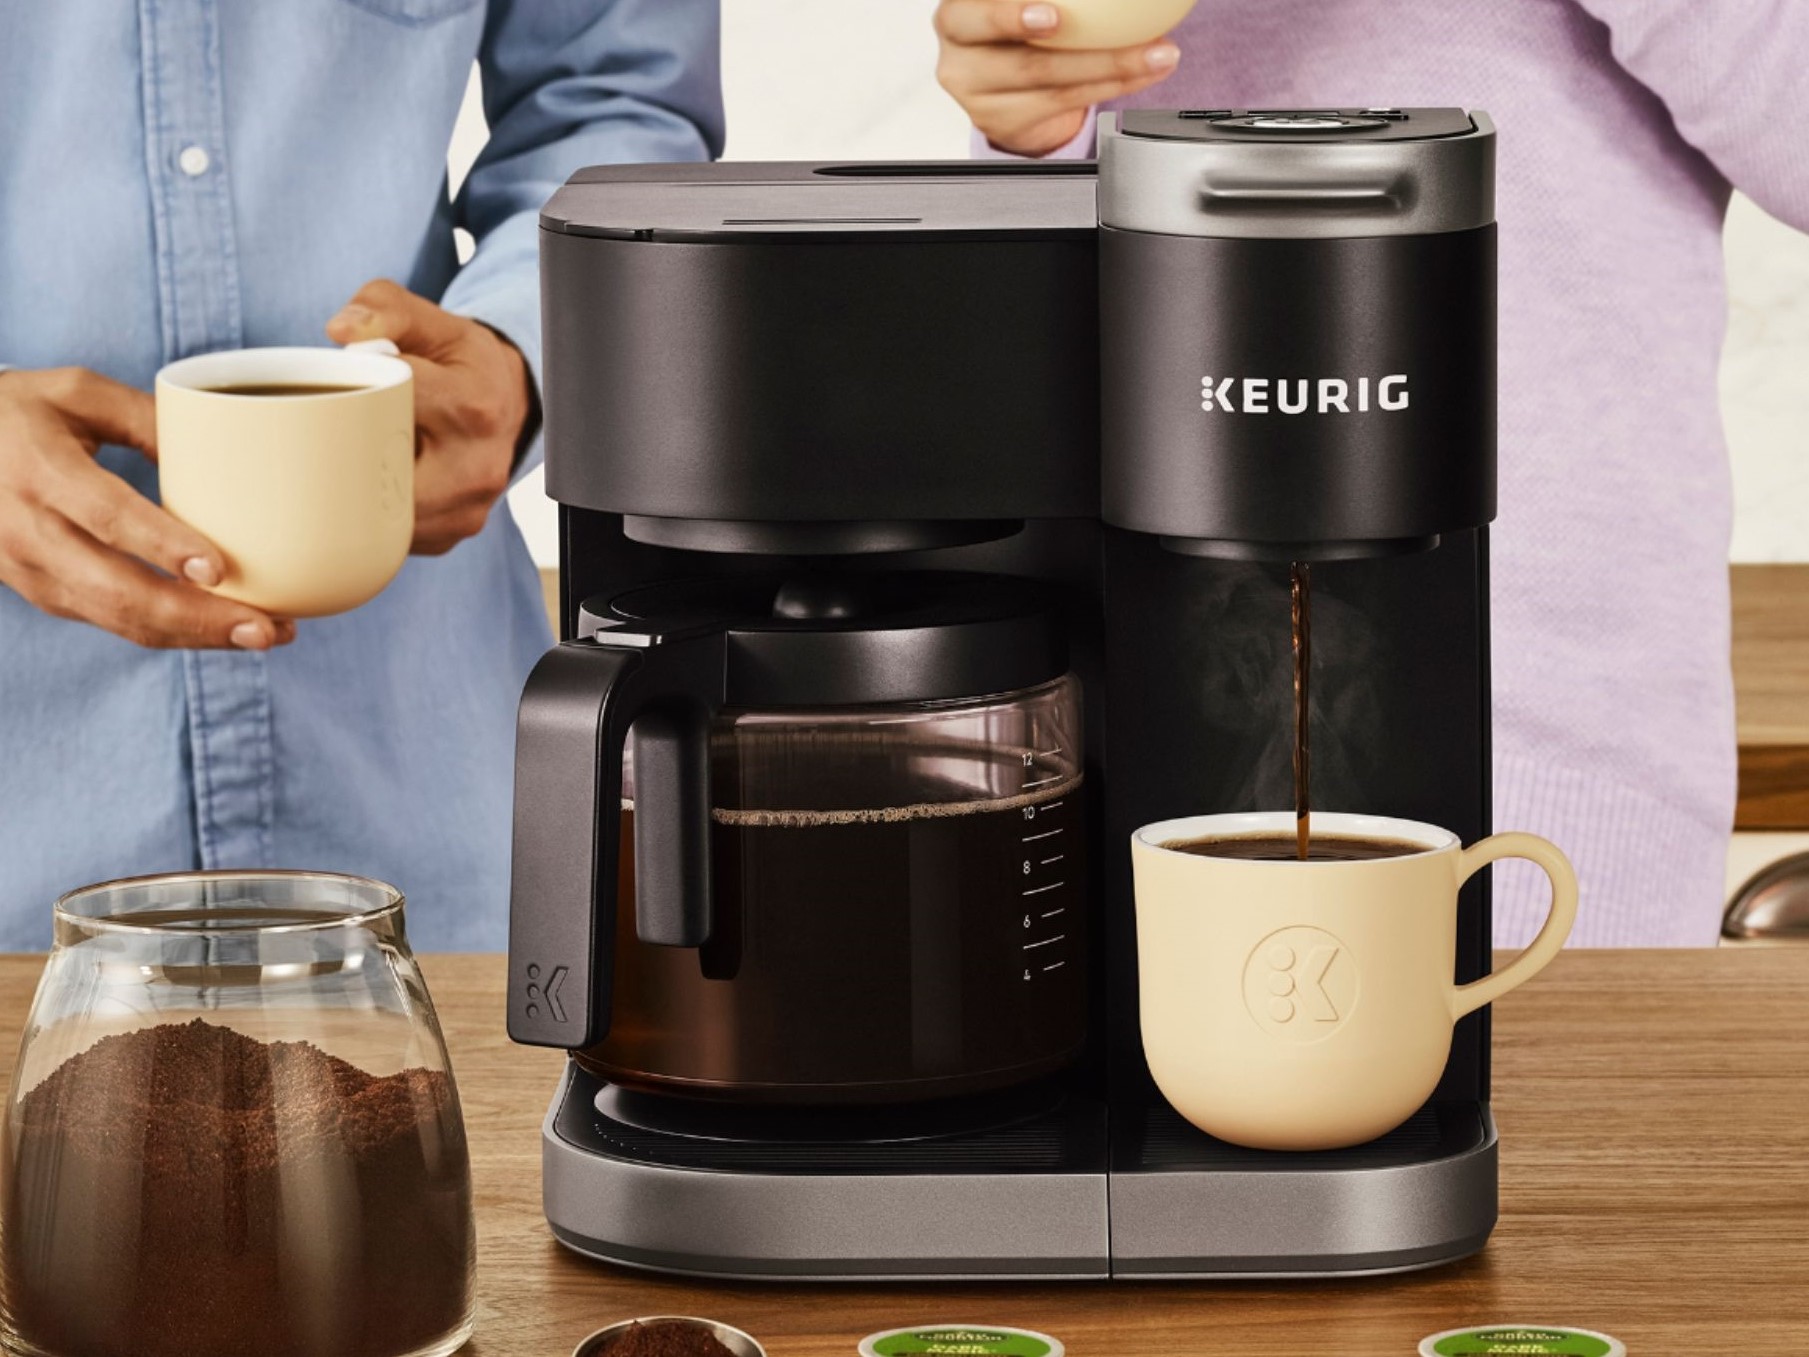 https://www.themanual.com/wp-content/uploads/sites/9/2021/08/keurig-k-duo-coffee-maker-brewing-a-cup.jpg?p=1